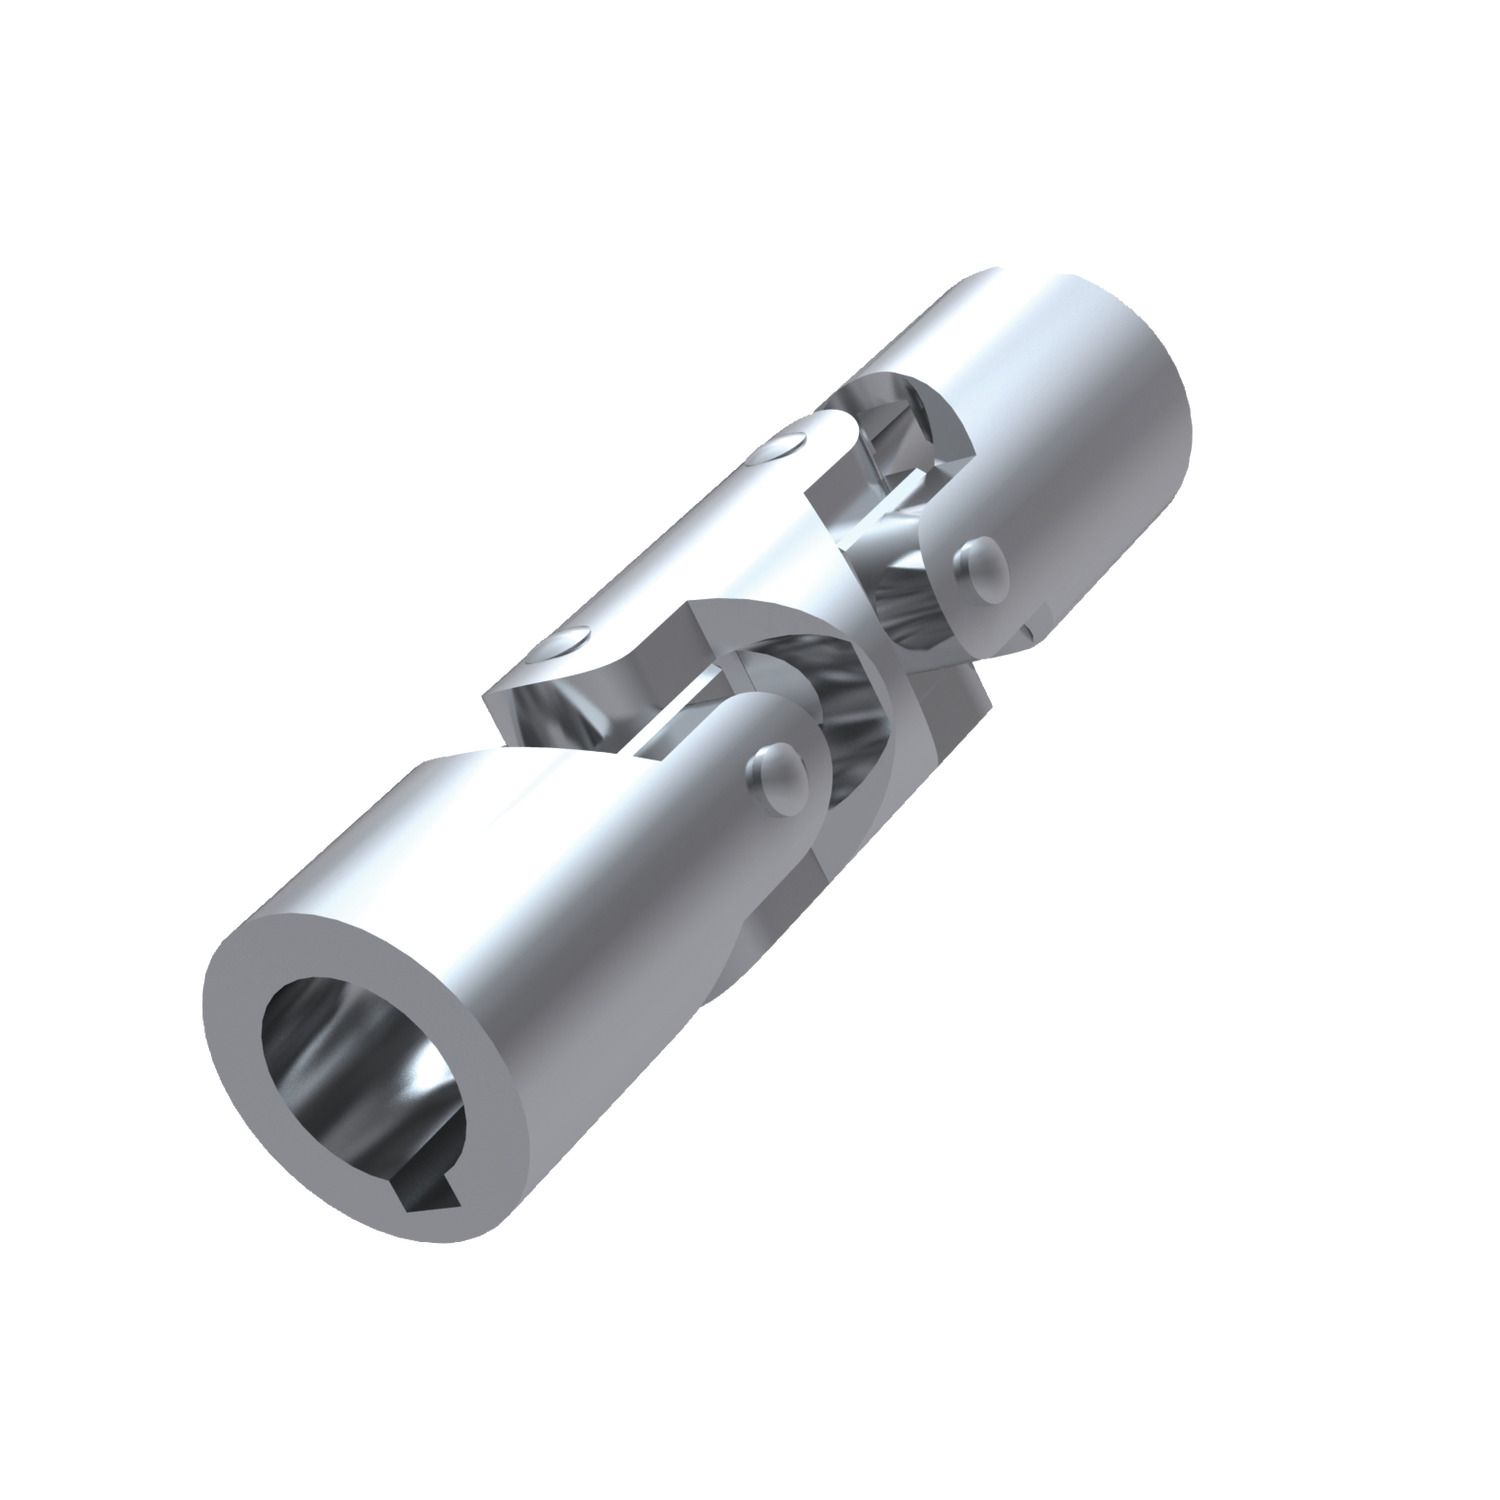 Double Universal Joint Double universal joint with needle roller bearing. Suitable for speeds up to 4000rpm.